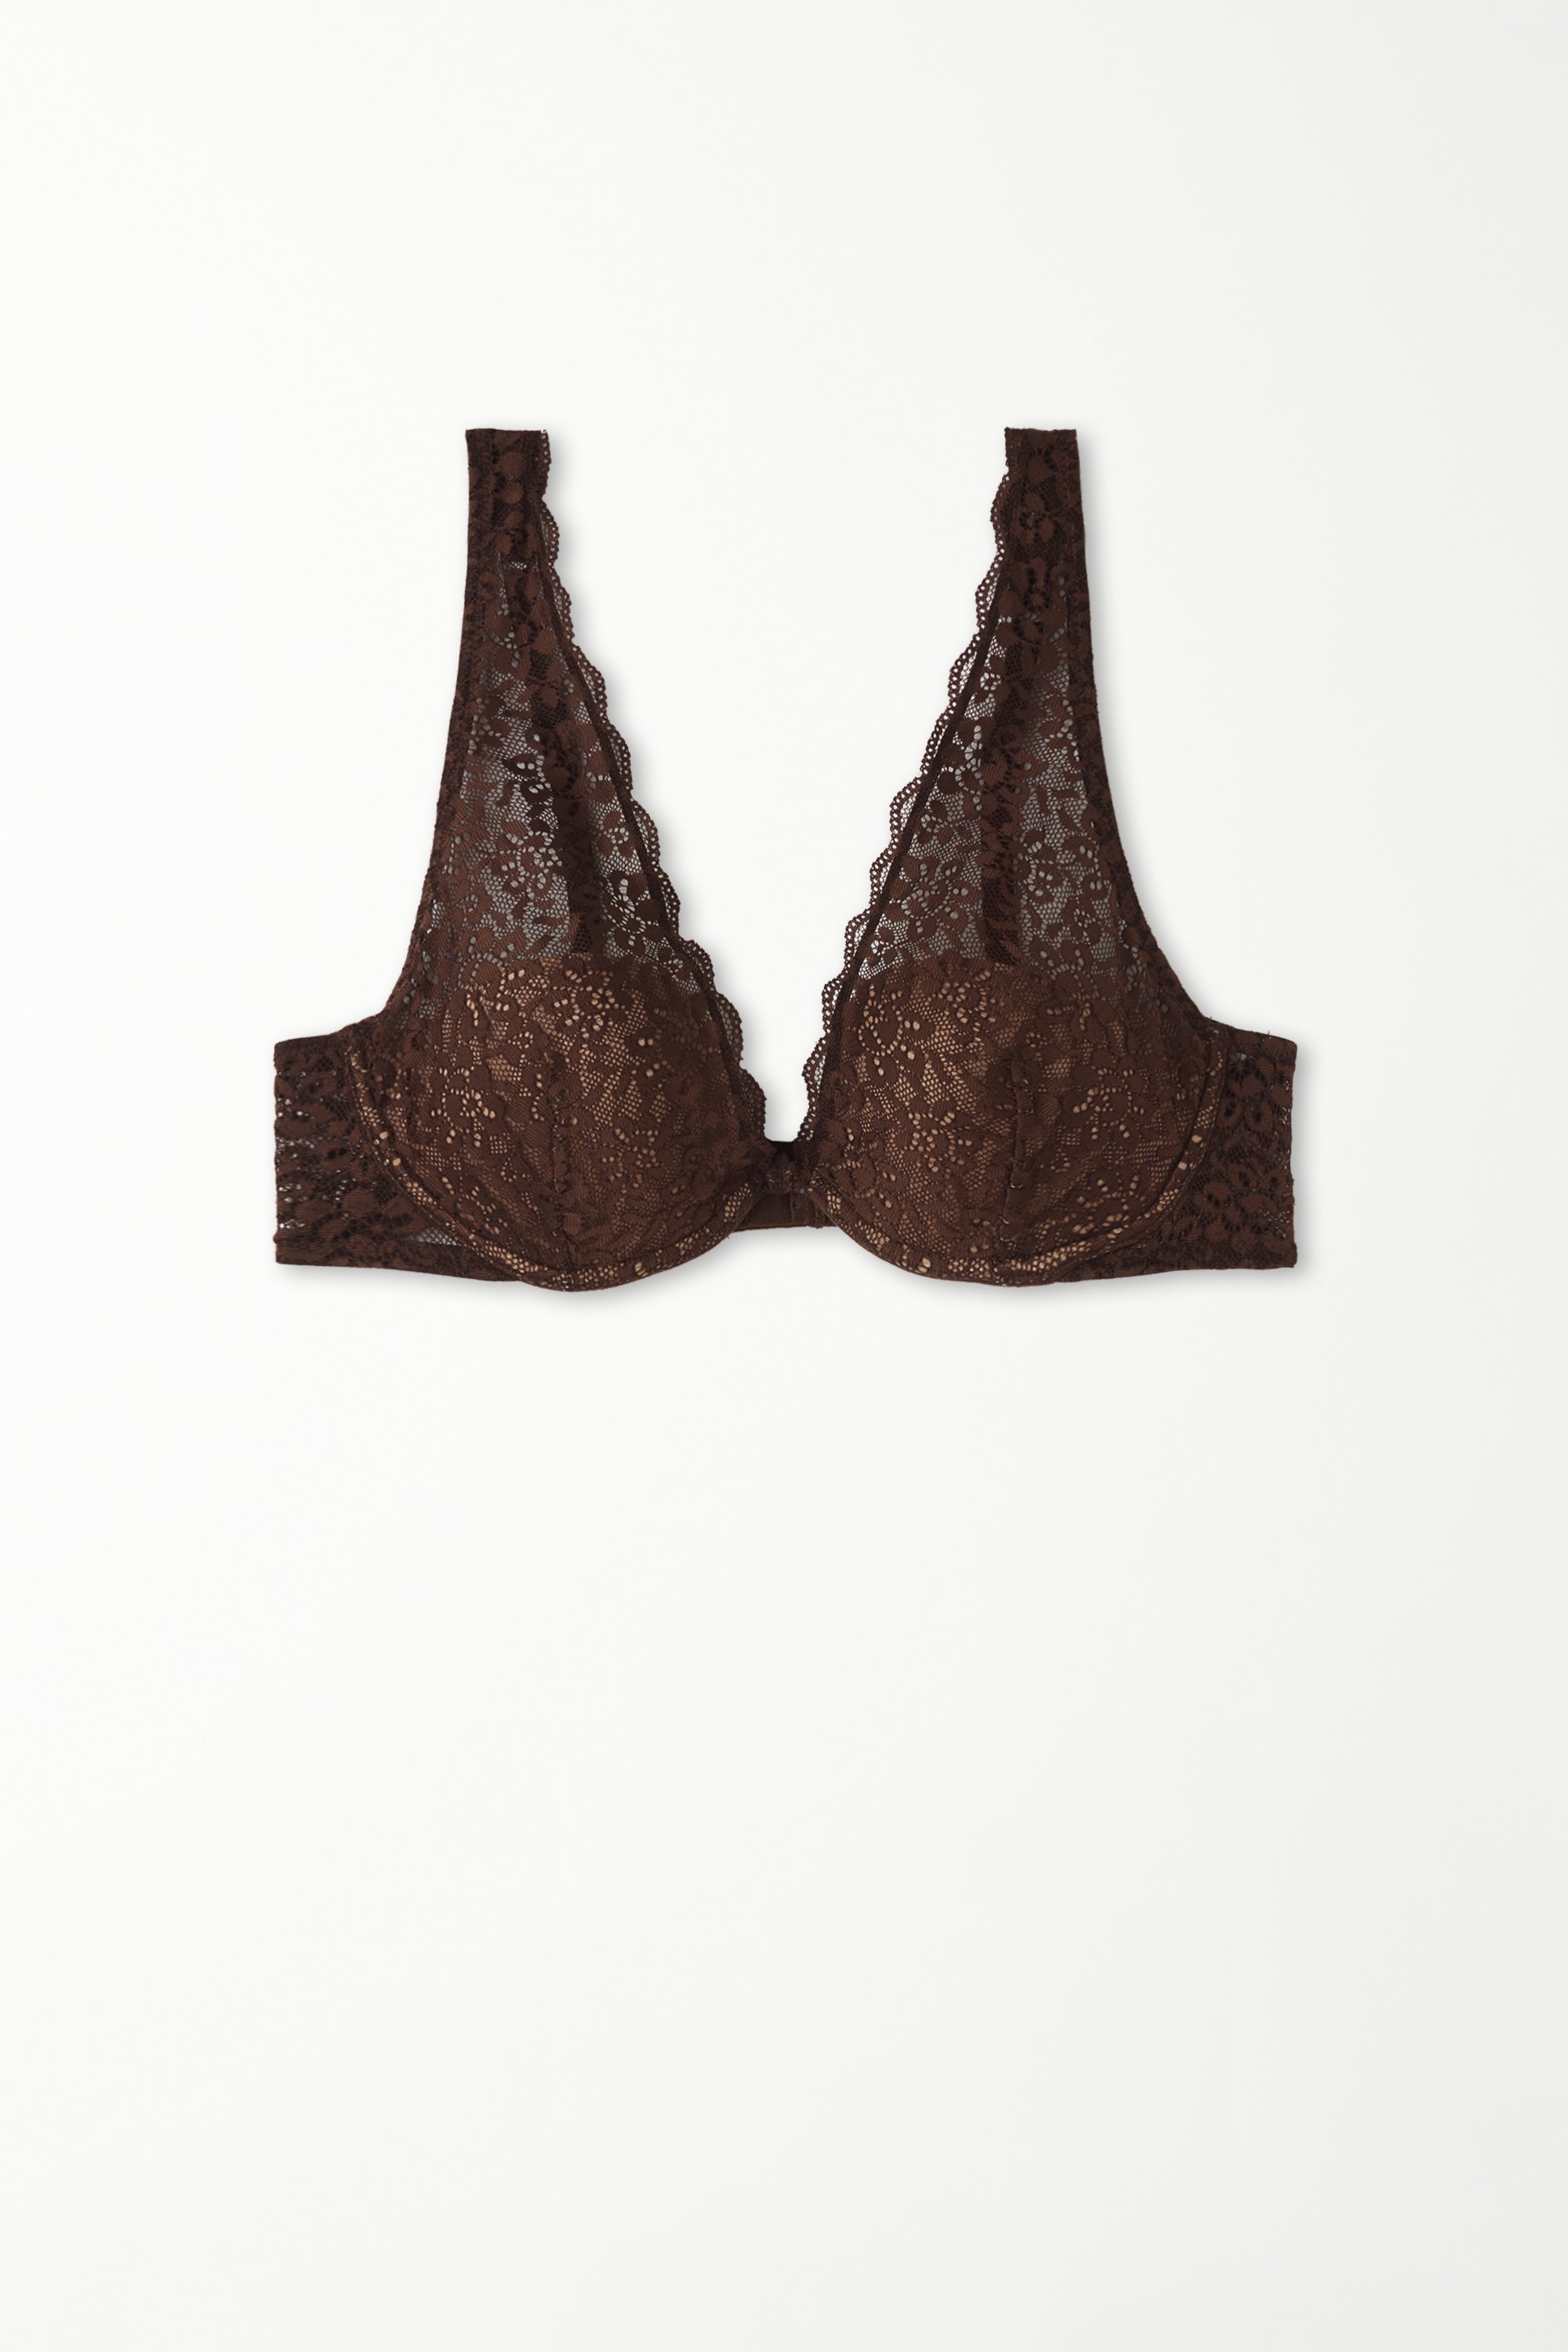 Miami Recycled Lace Balconette Bra